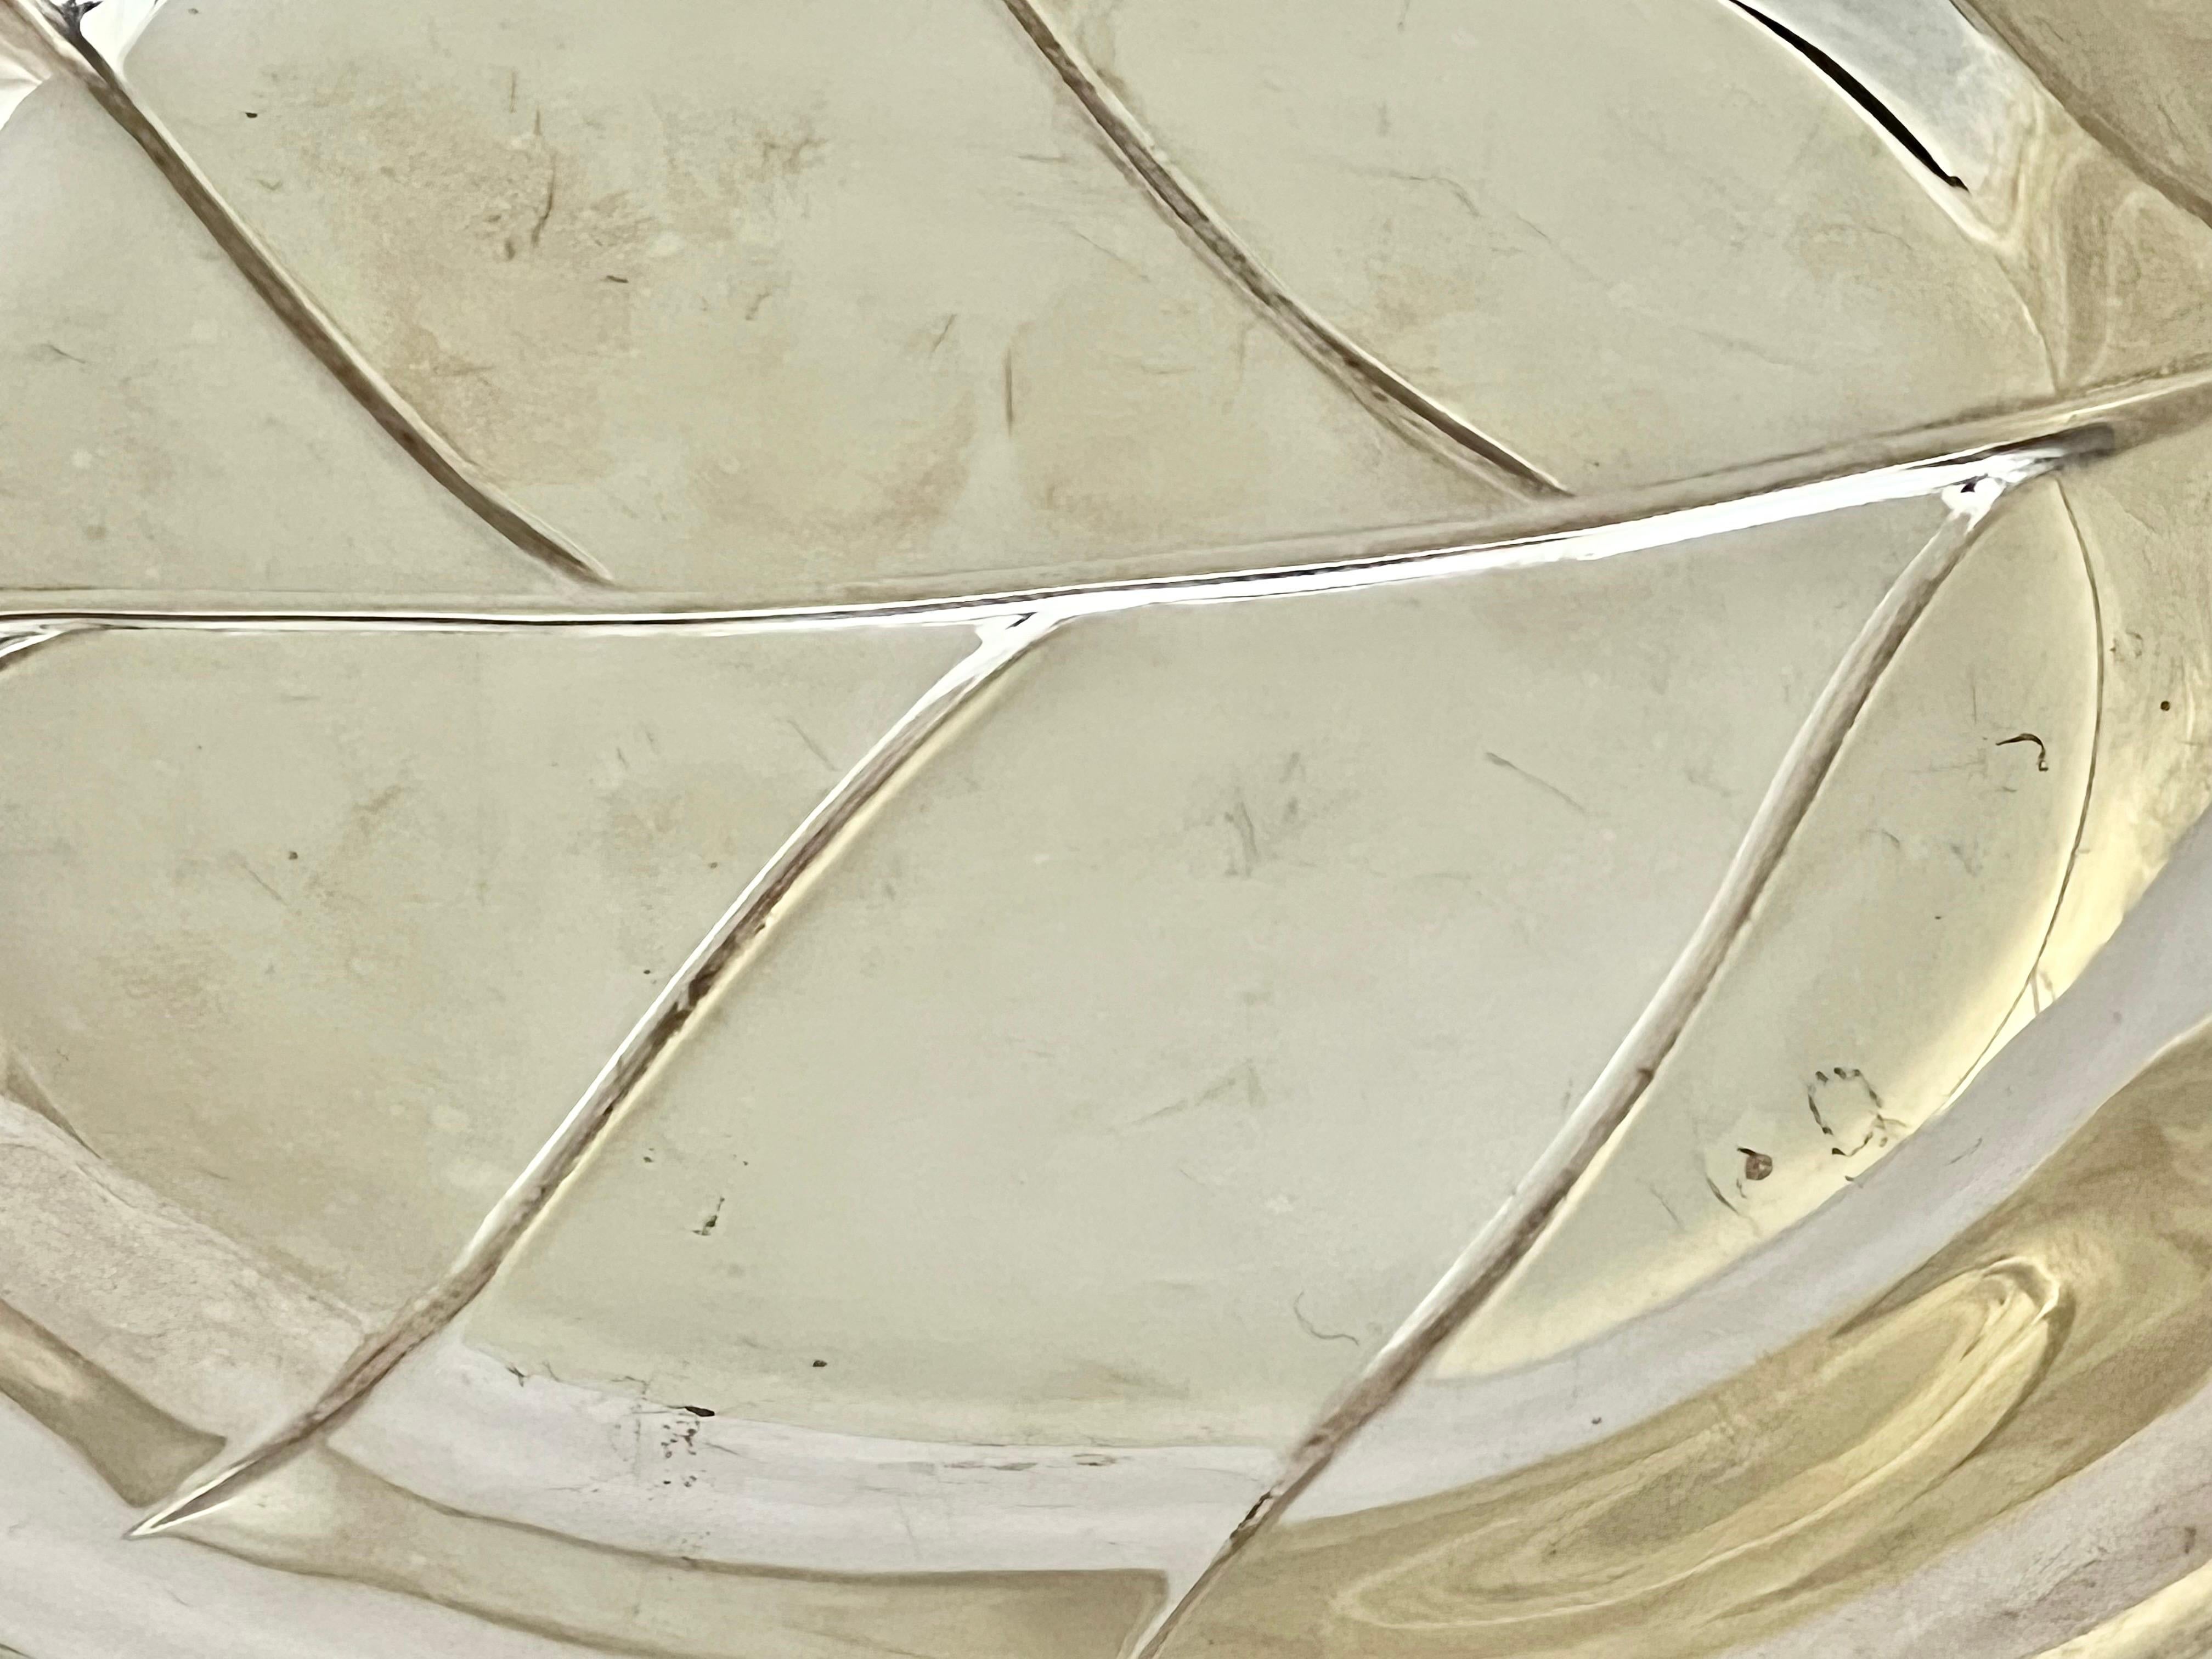 Beautiful silver plate dish depicting a lemon leaf. The leaf is nicely detailed and has a faded but not legible hallmark. This would make a lovely soap dish for your powder room. Hallmarked 348 Silver Co.